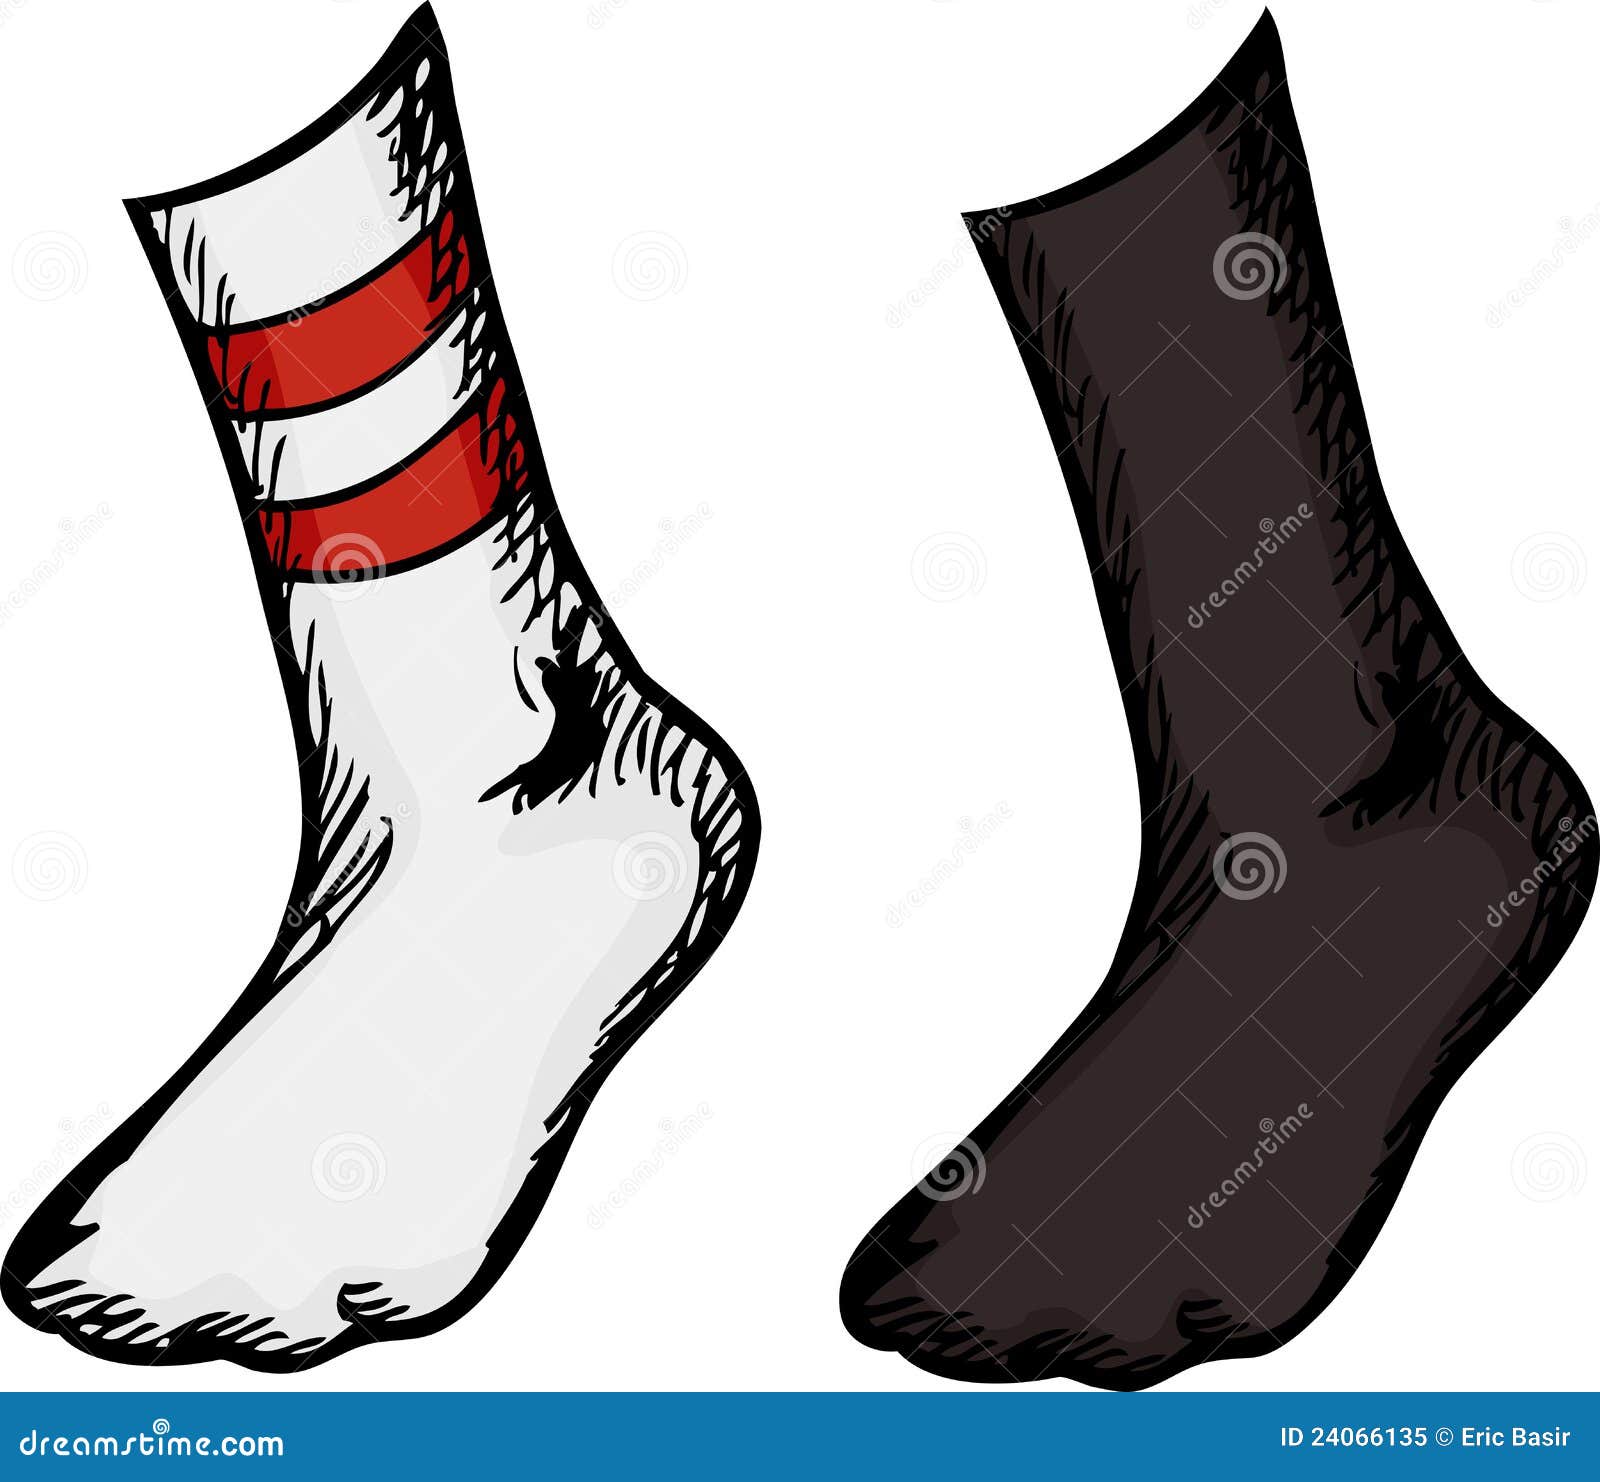 Socks with Feet in Them stock vector. Illustration of background - 24066135